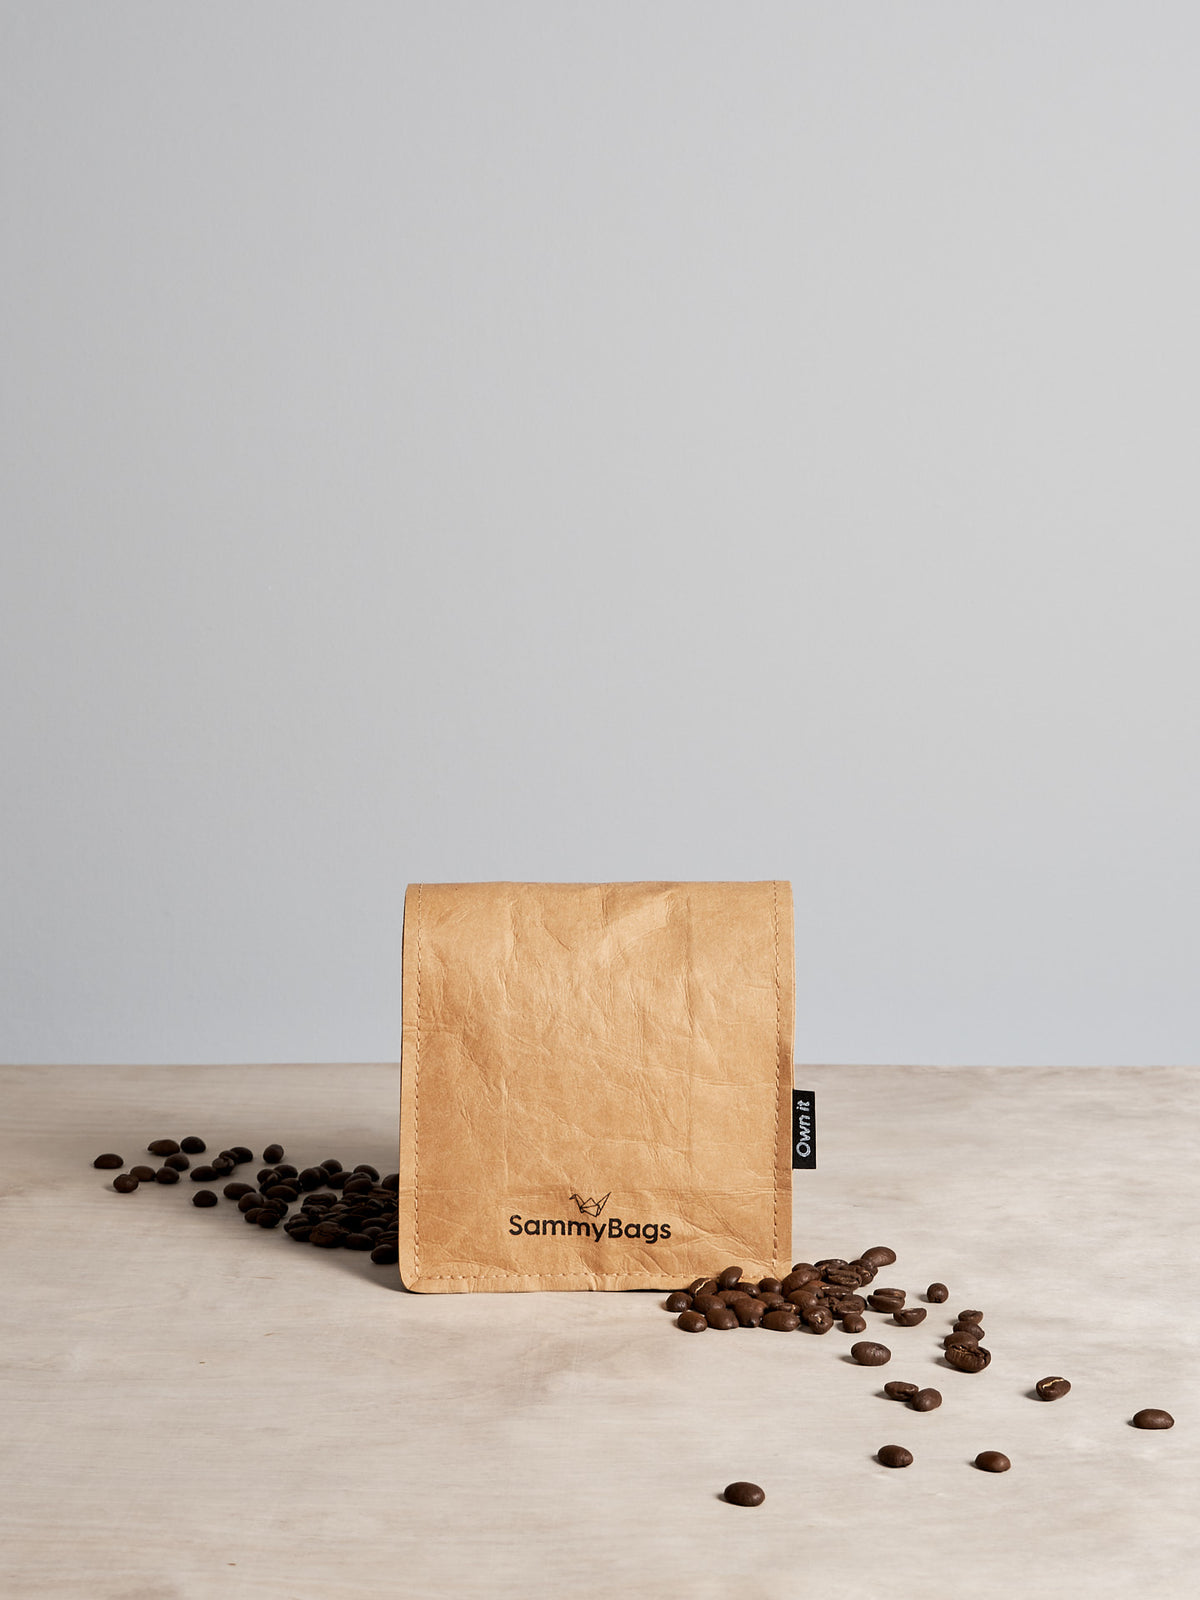 A Sammy Bags Reusable Snack Bag of coffee beans on a table.